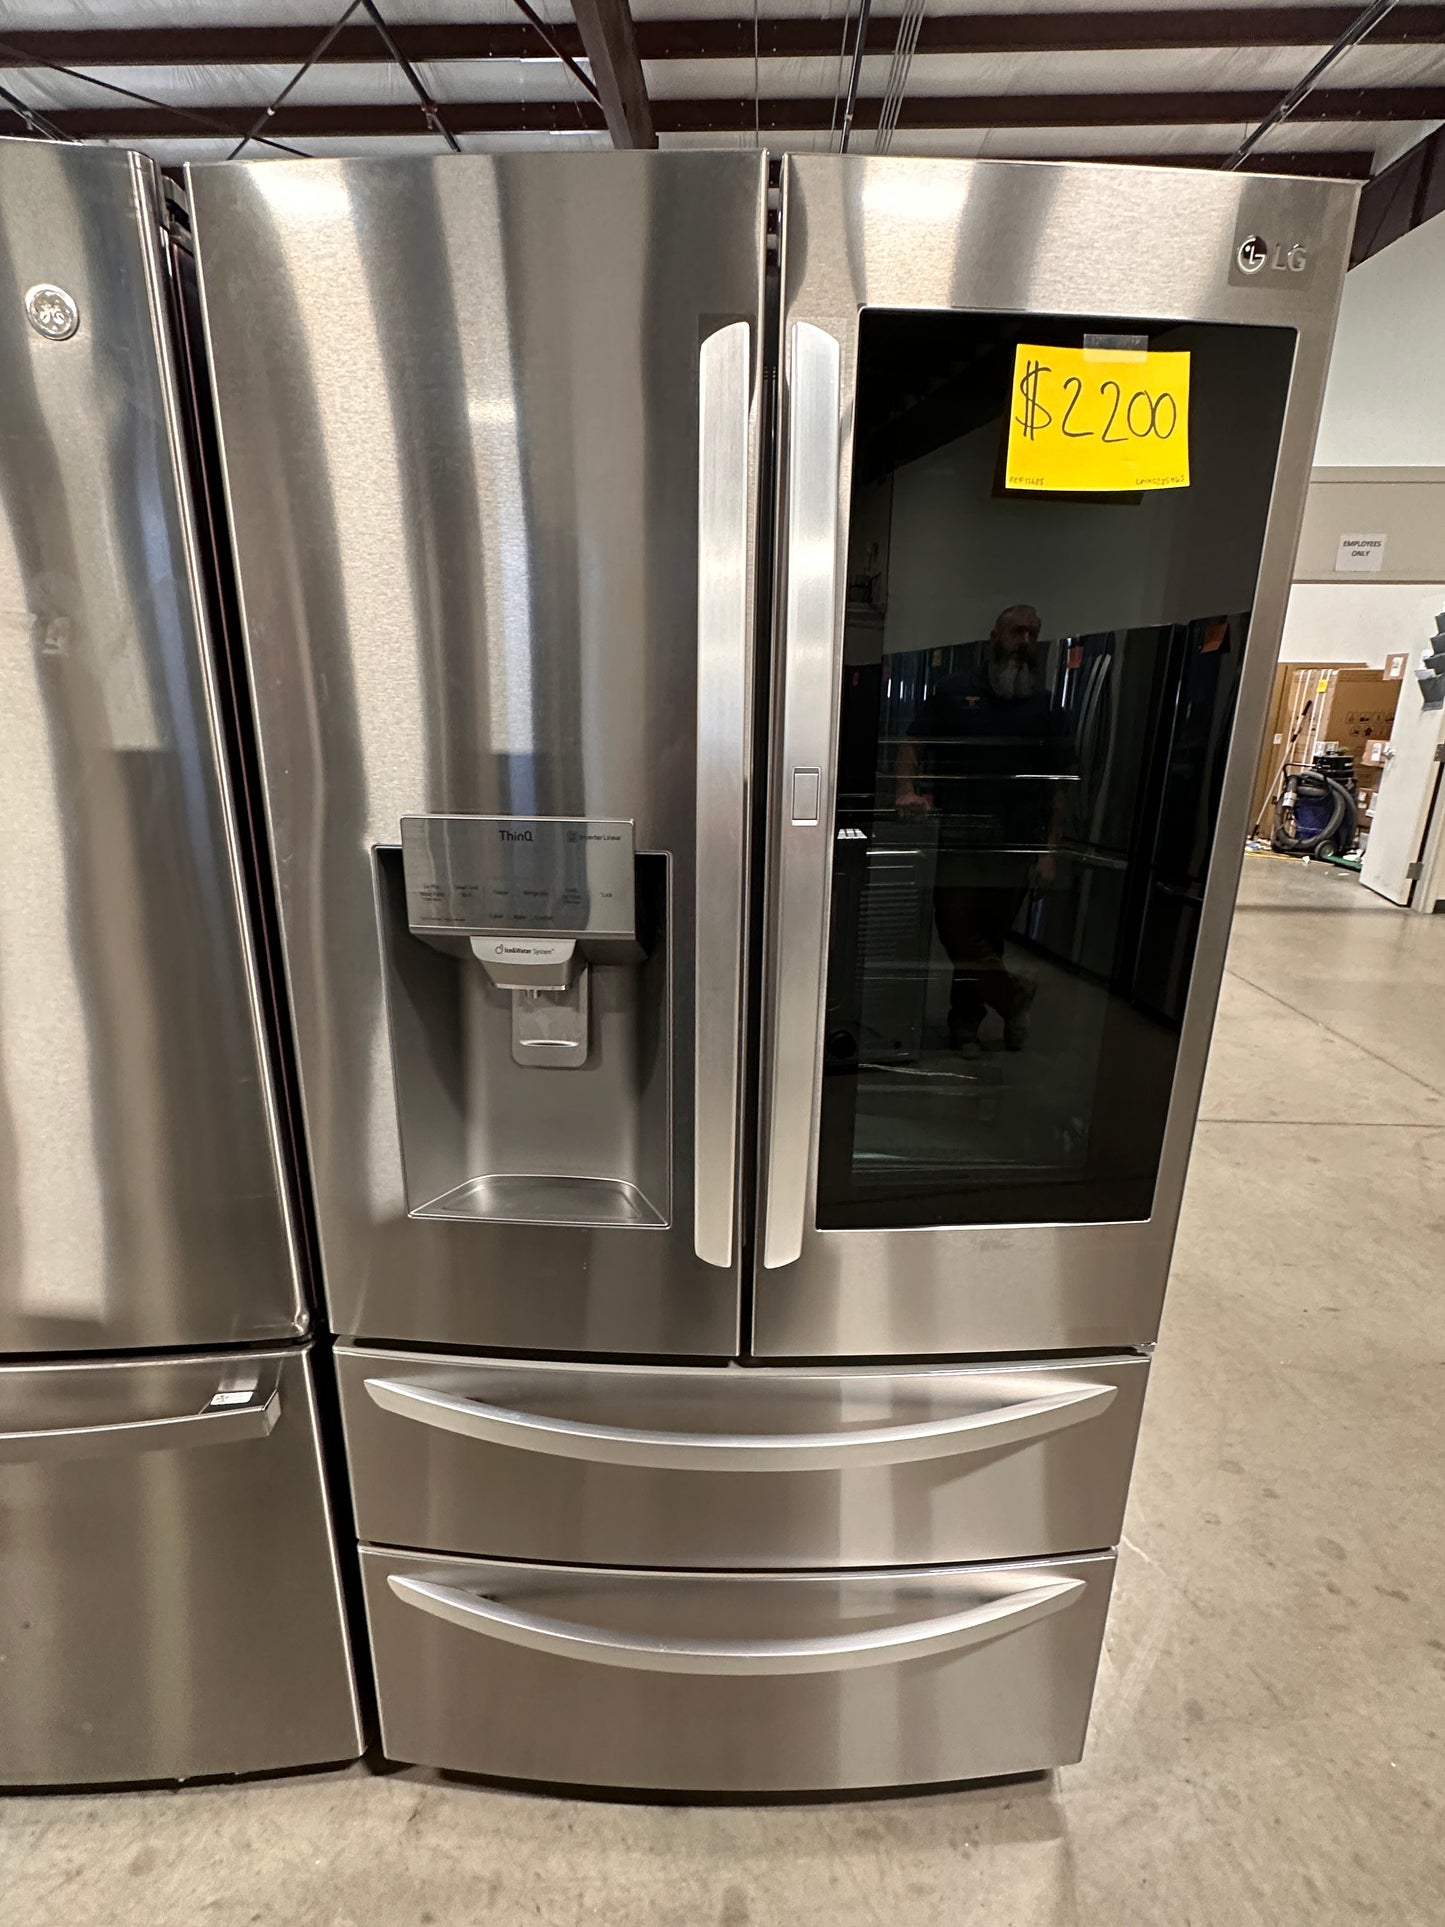 GREAT NEW SMART LG REFRIGERATOR with INSTAVIEW - REF12688